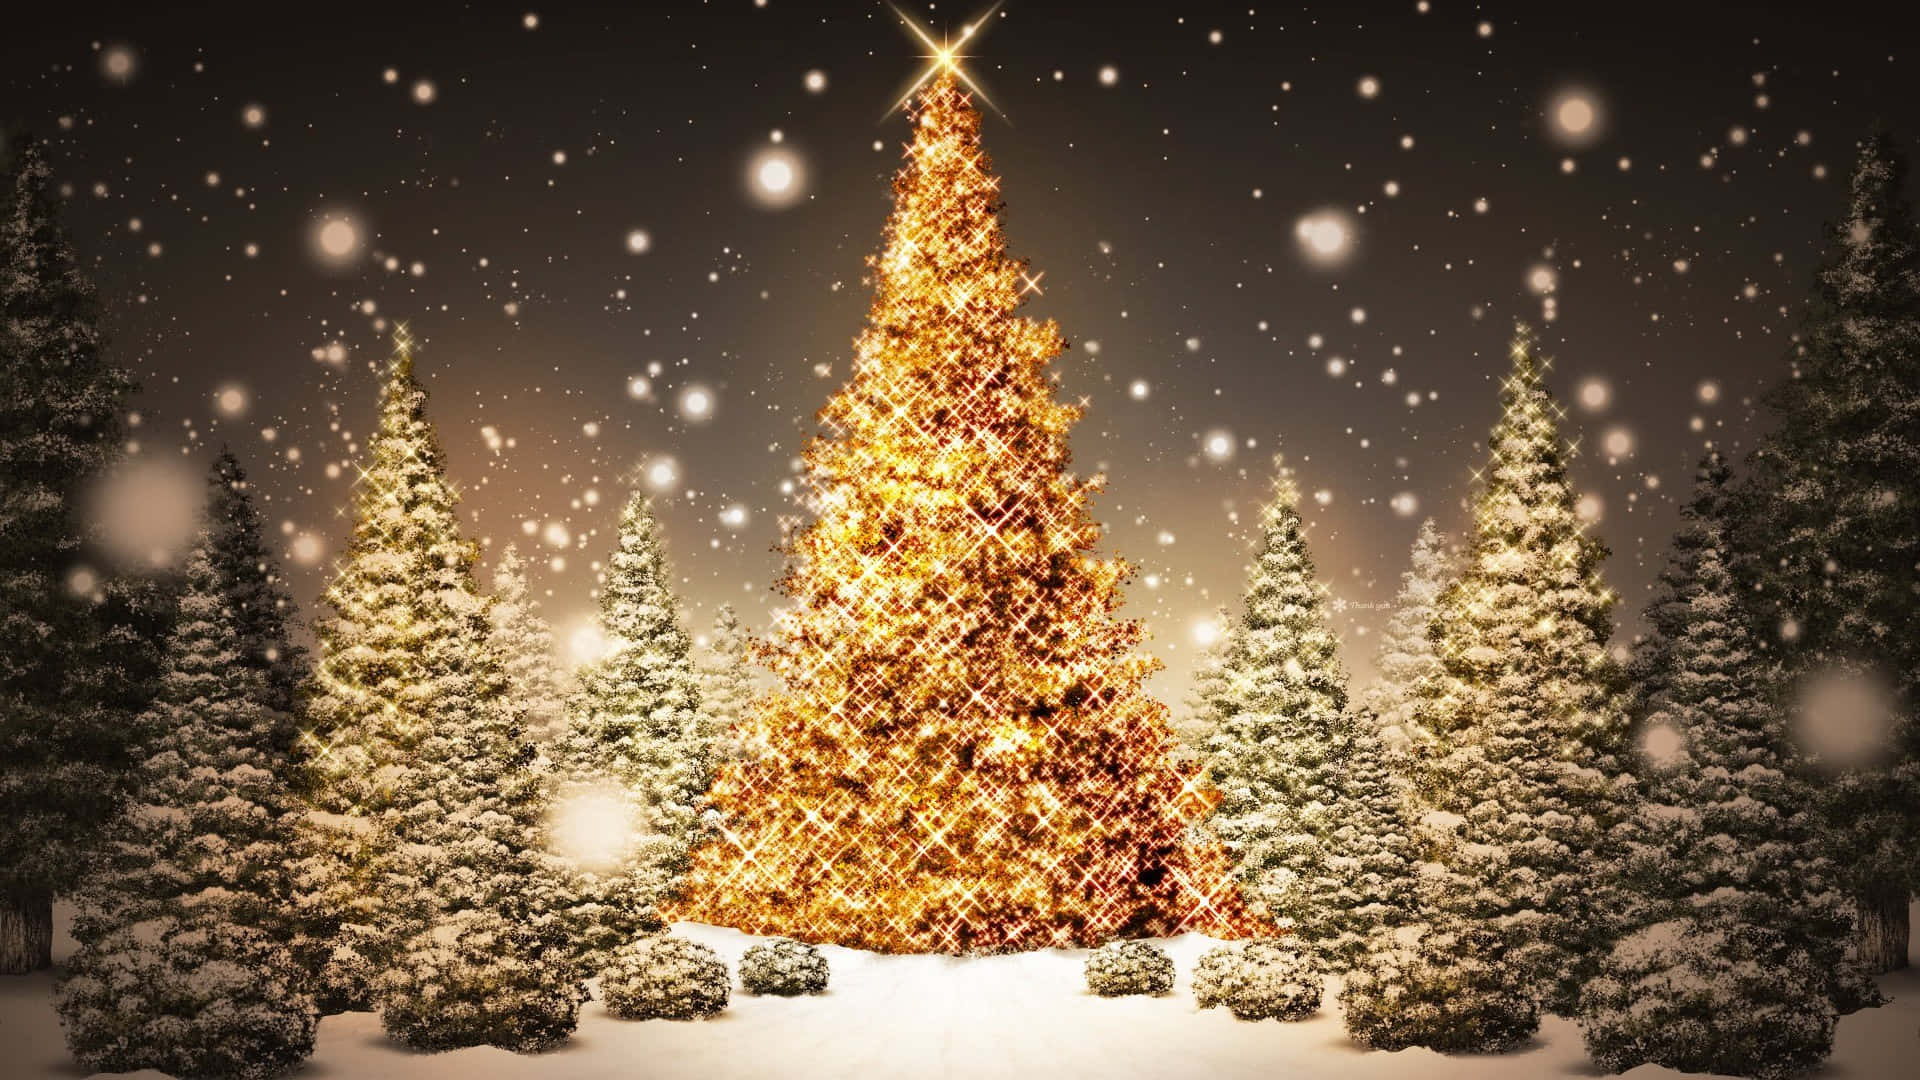 A Golden Christmas Tree In The Snow Wallpaper